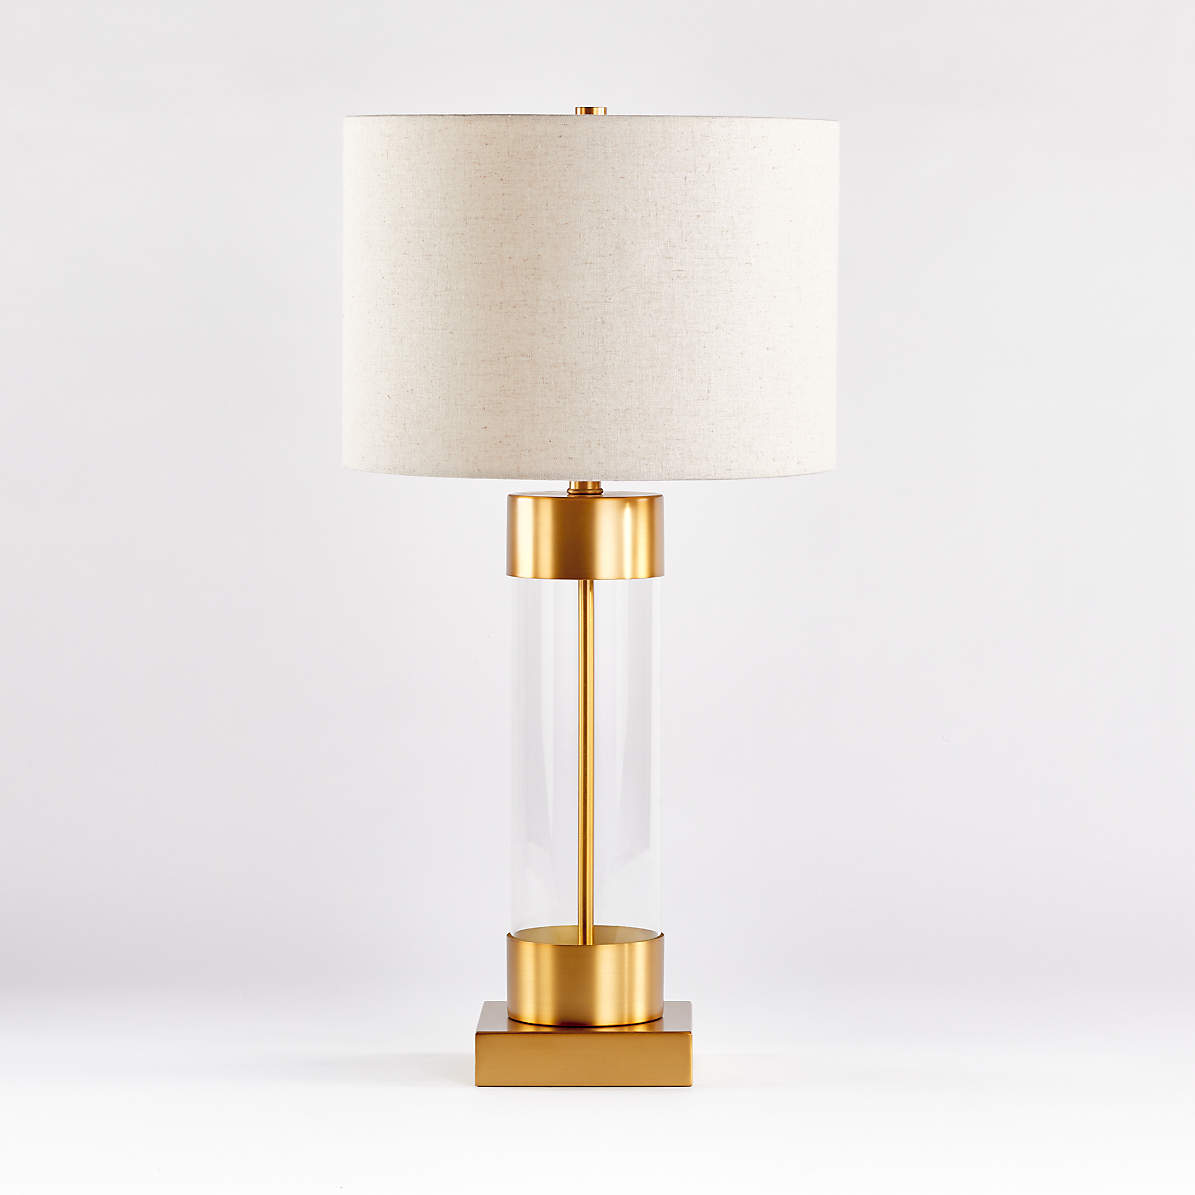 Avenue Brass Table Lamp With Usb Port, Small Table Lamps With Usb Port